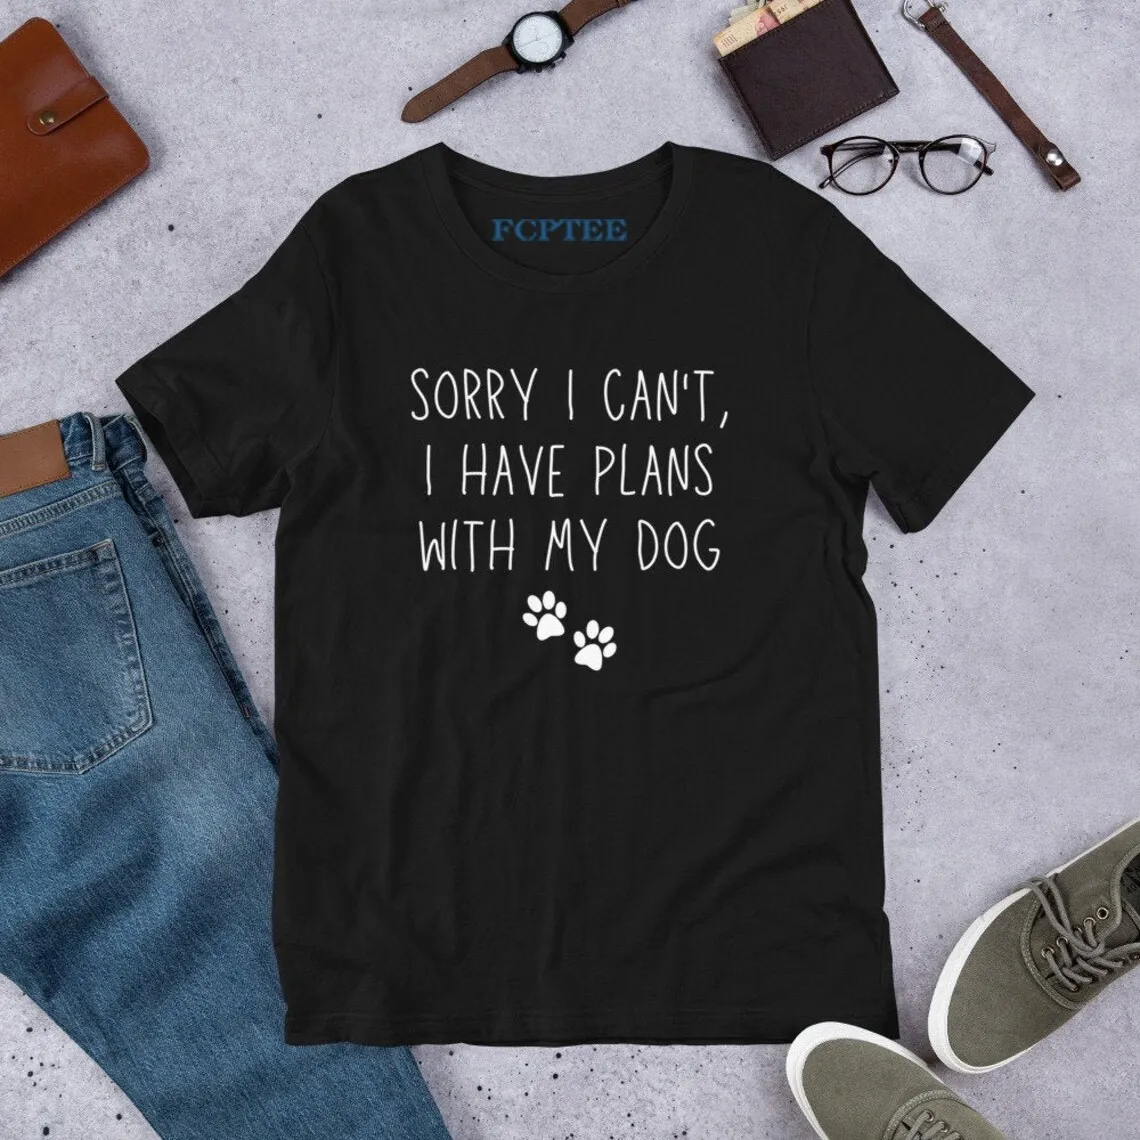 

Sorry I Cant I Have Plans With My Dog Women T Shirts Funny Dog Lovers Short Sleeve Shirts Vintage Retro No Fade Tops Clothes